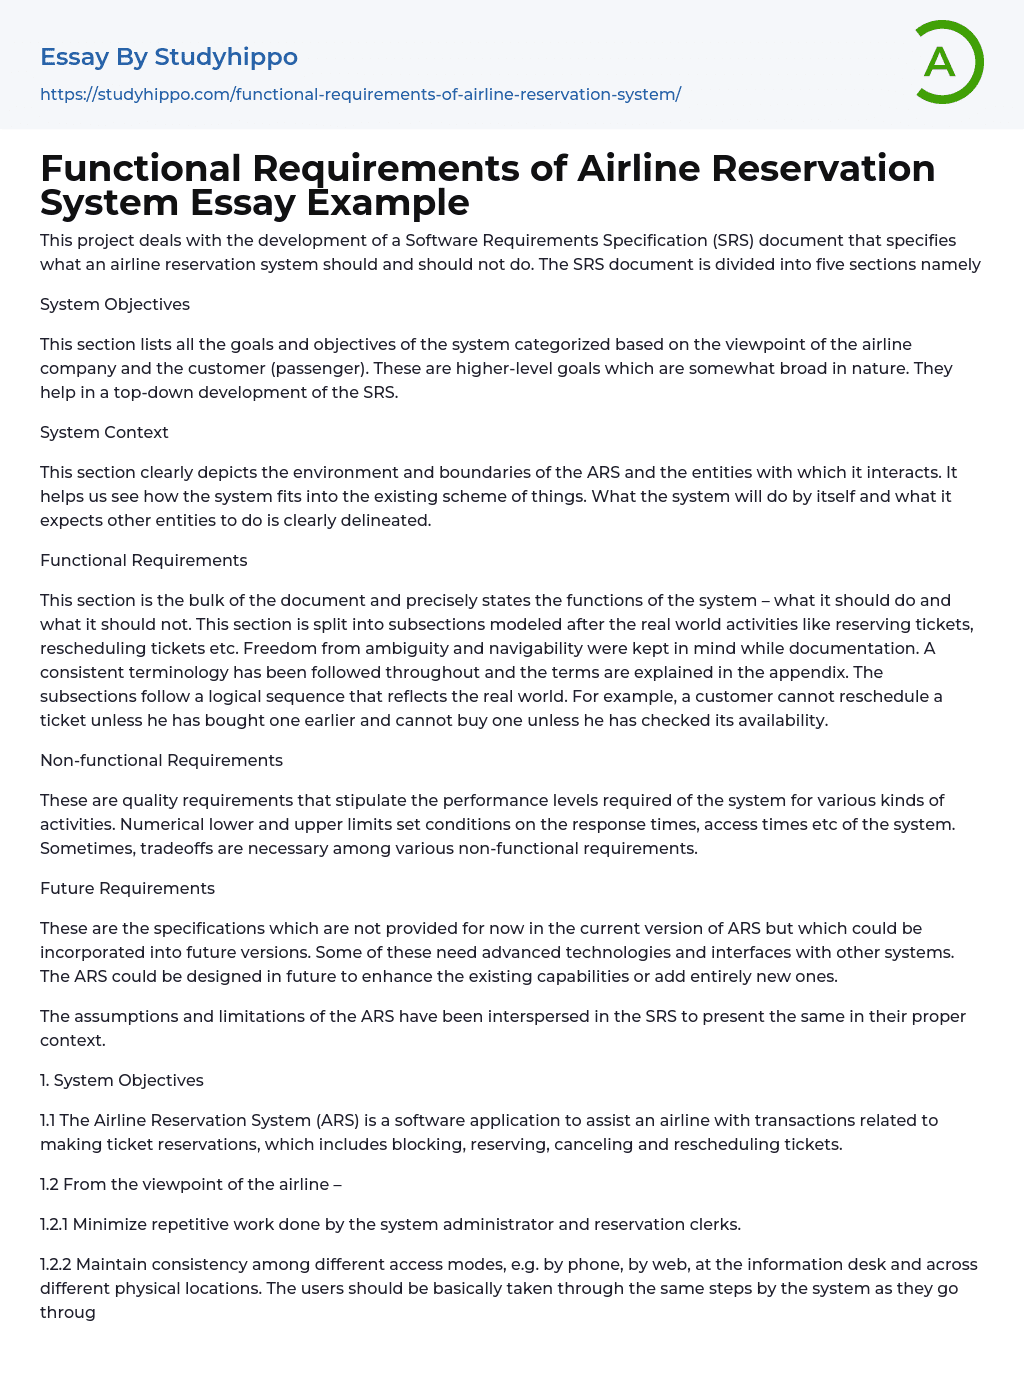 Functional Requirements of Airline Reservation System Essay Example